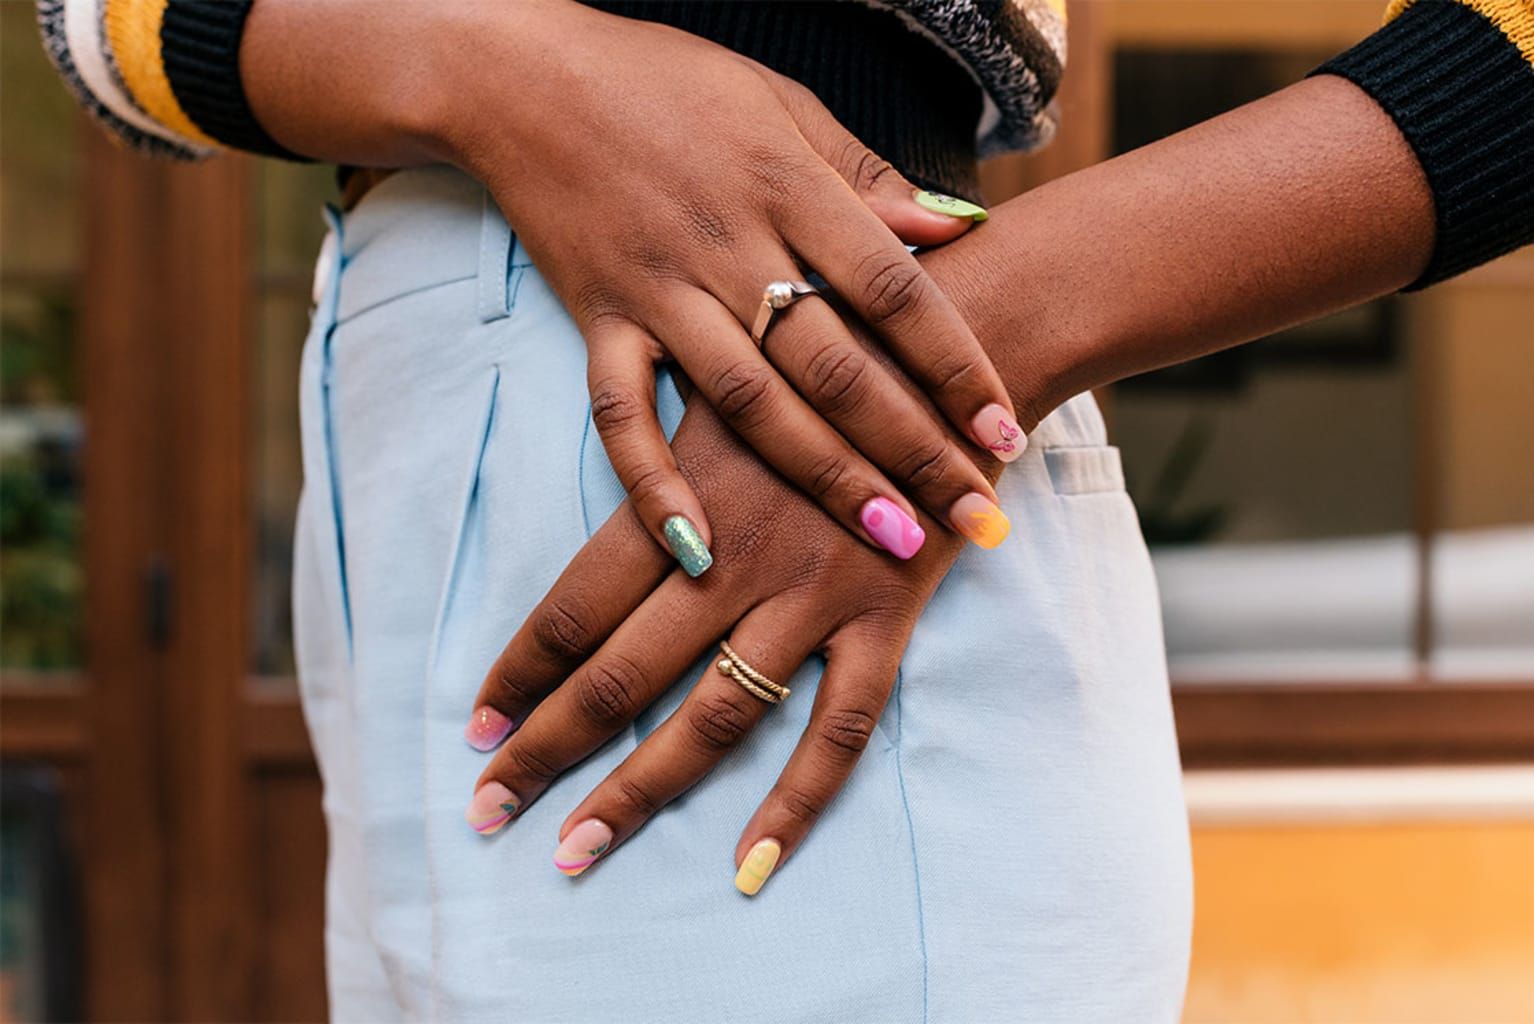 The Latest Nail Polish Trends Taking the Beauty World by Storm